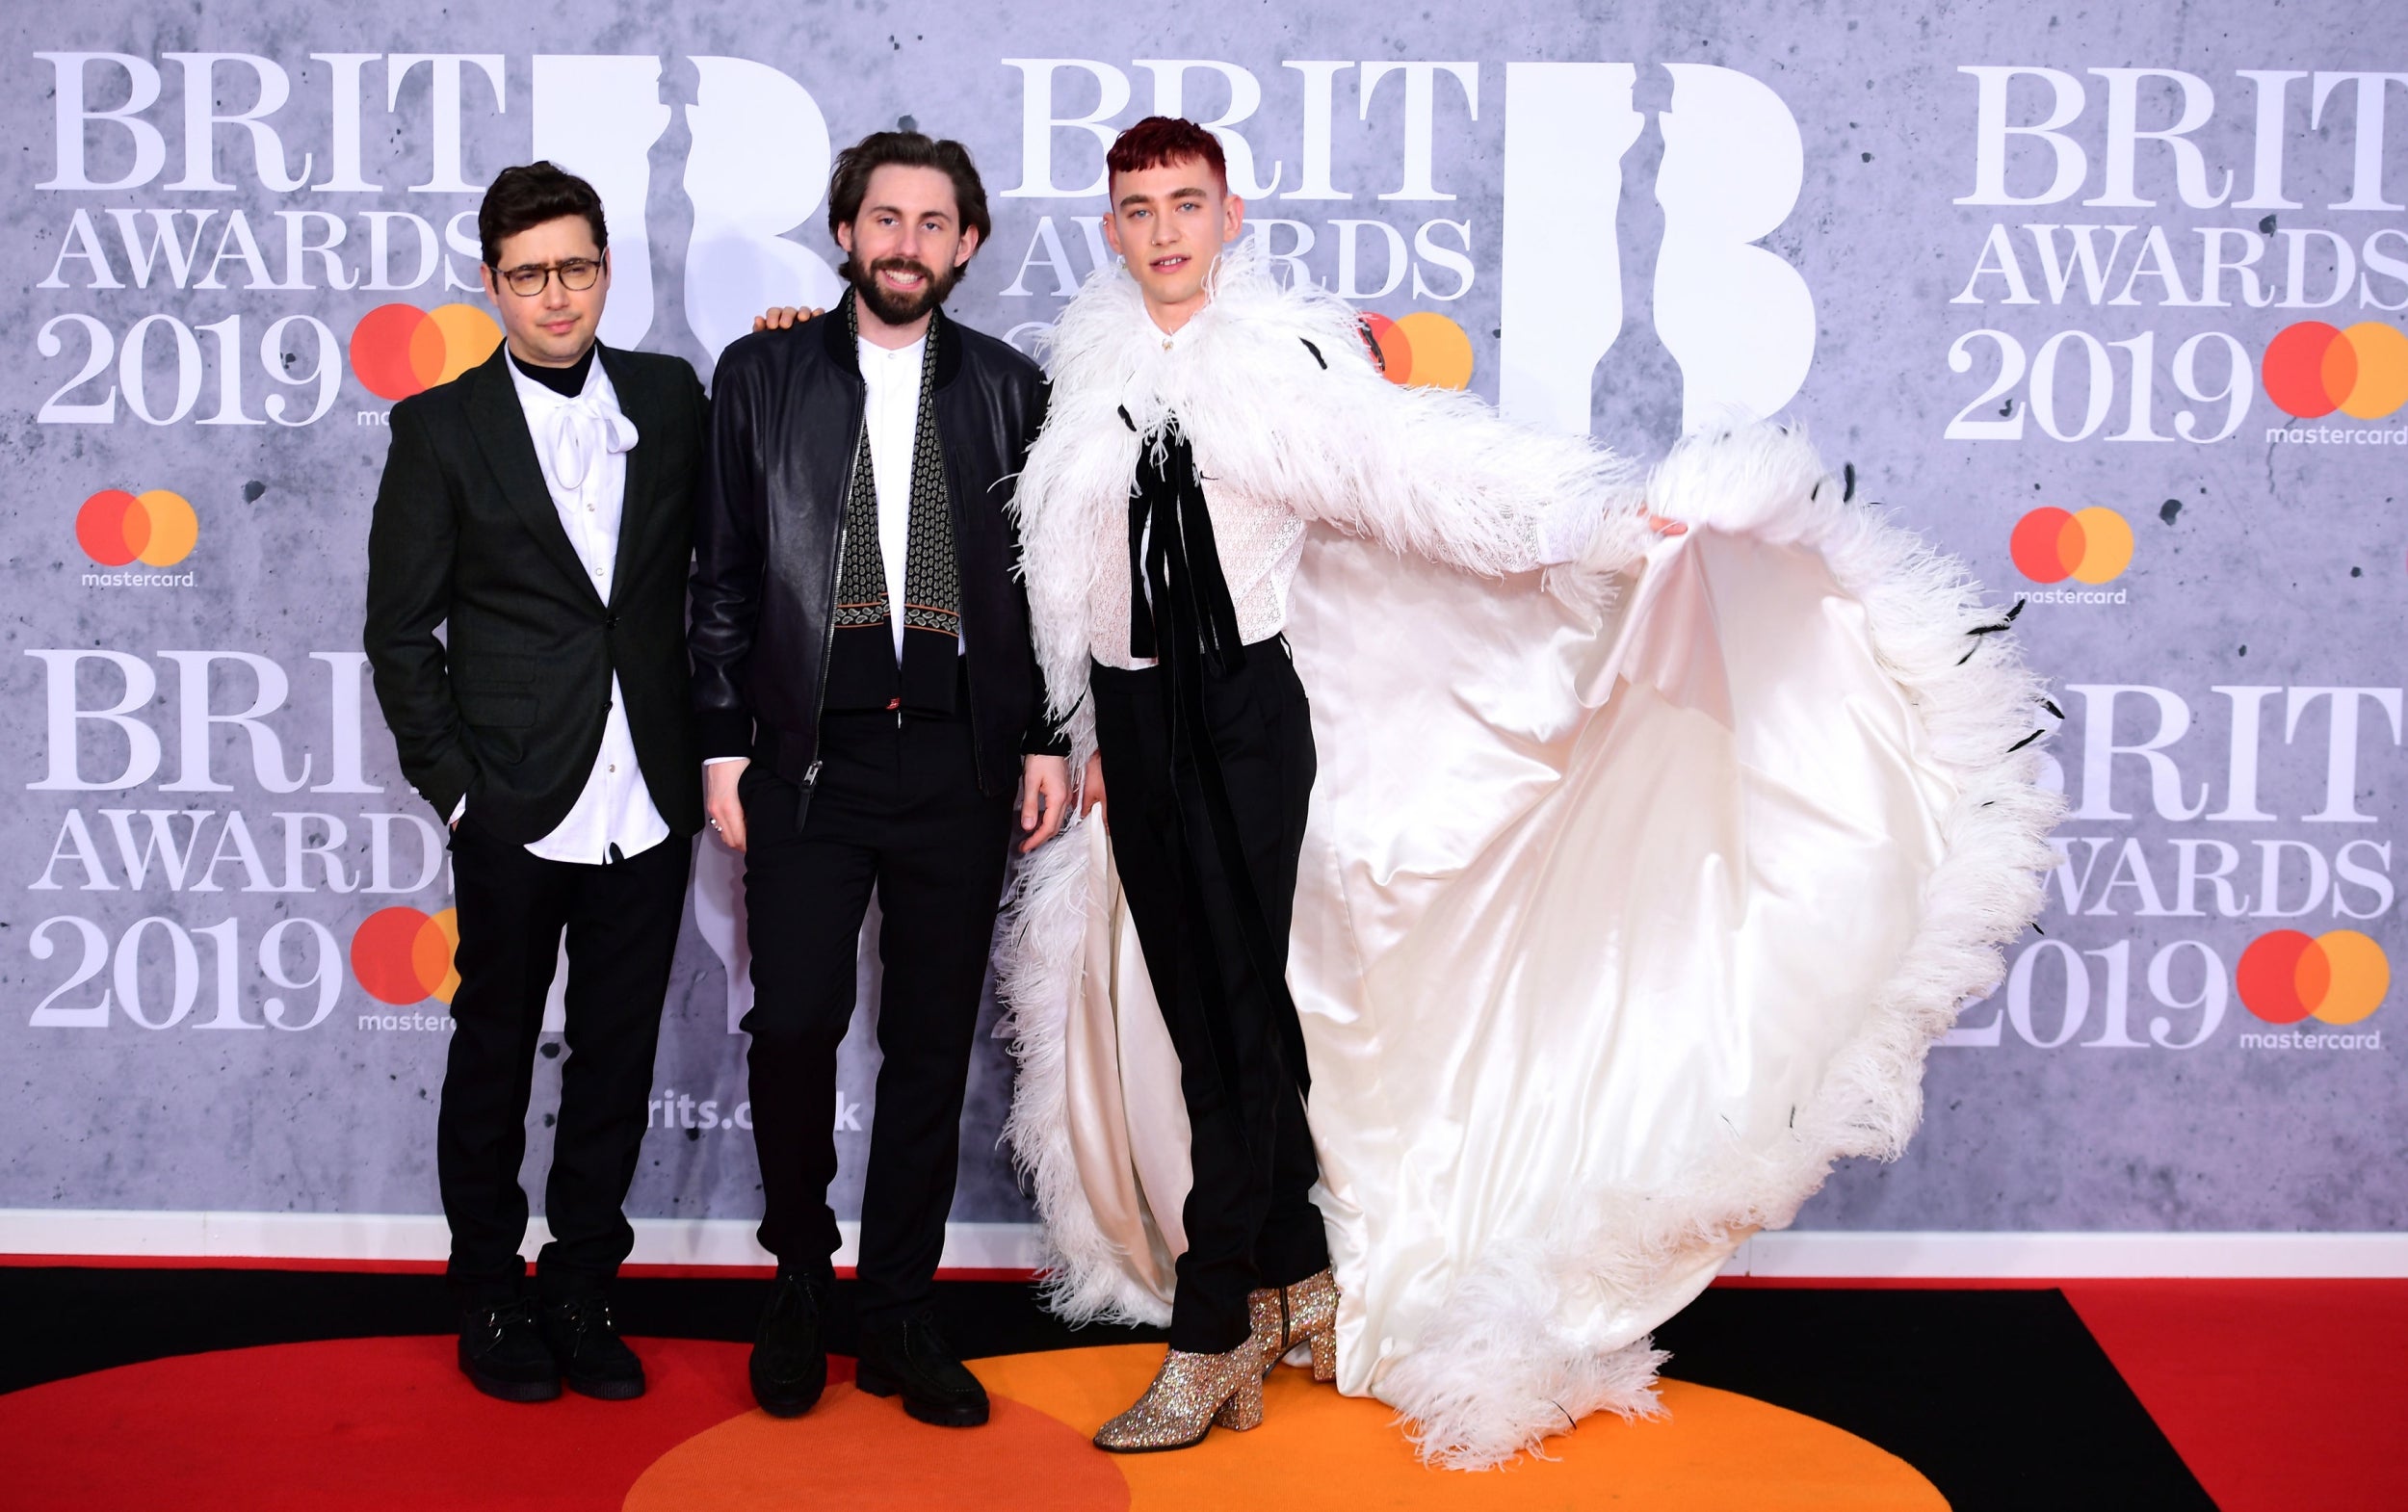 Years & Years (Turkmen, Goldsworthy and Alexander) at the Brit Awards in 2019